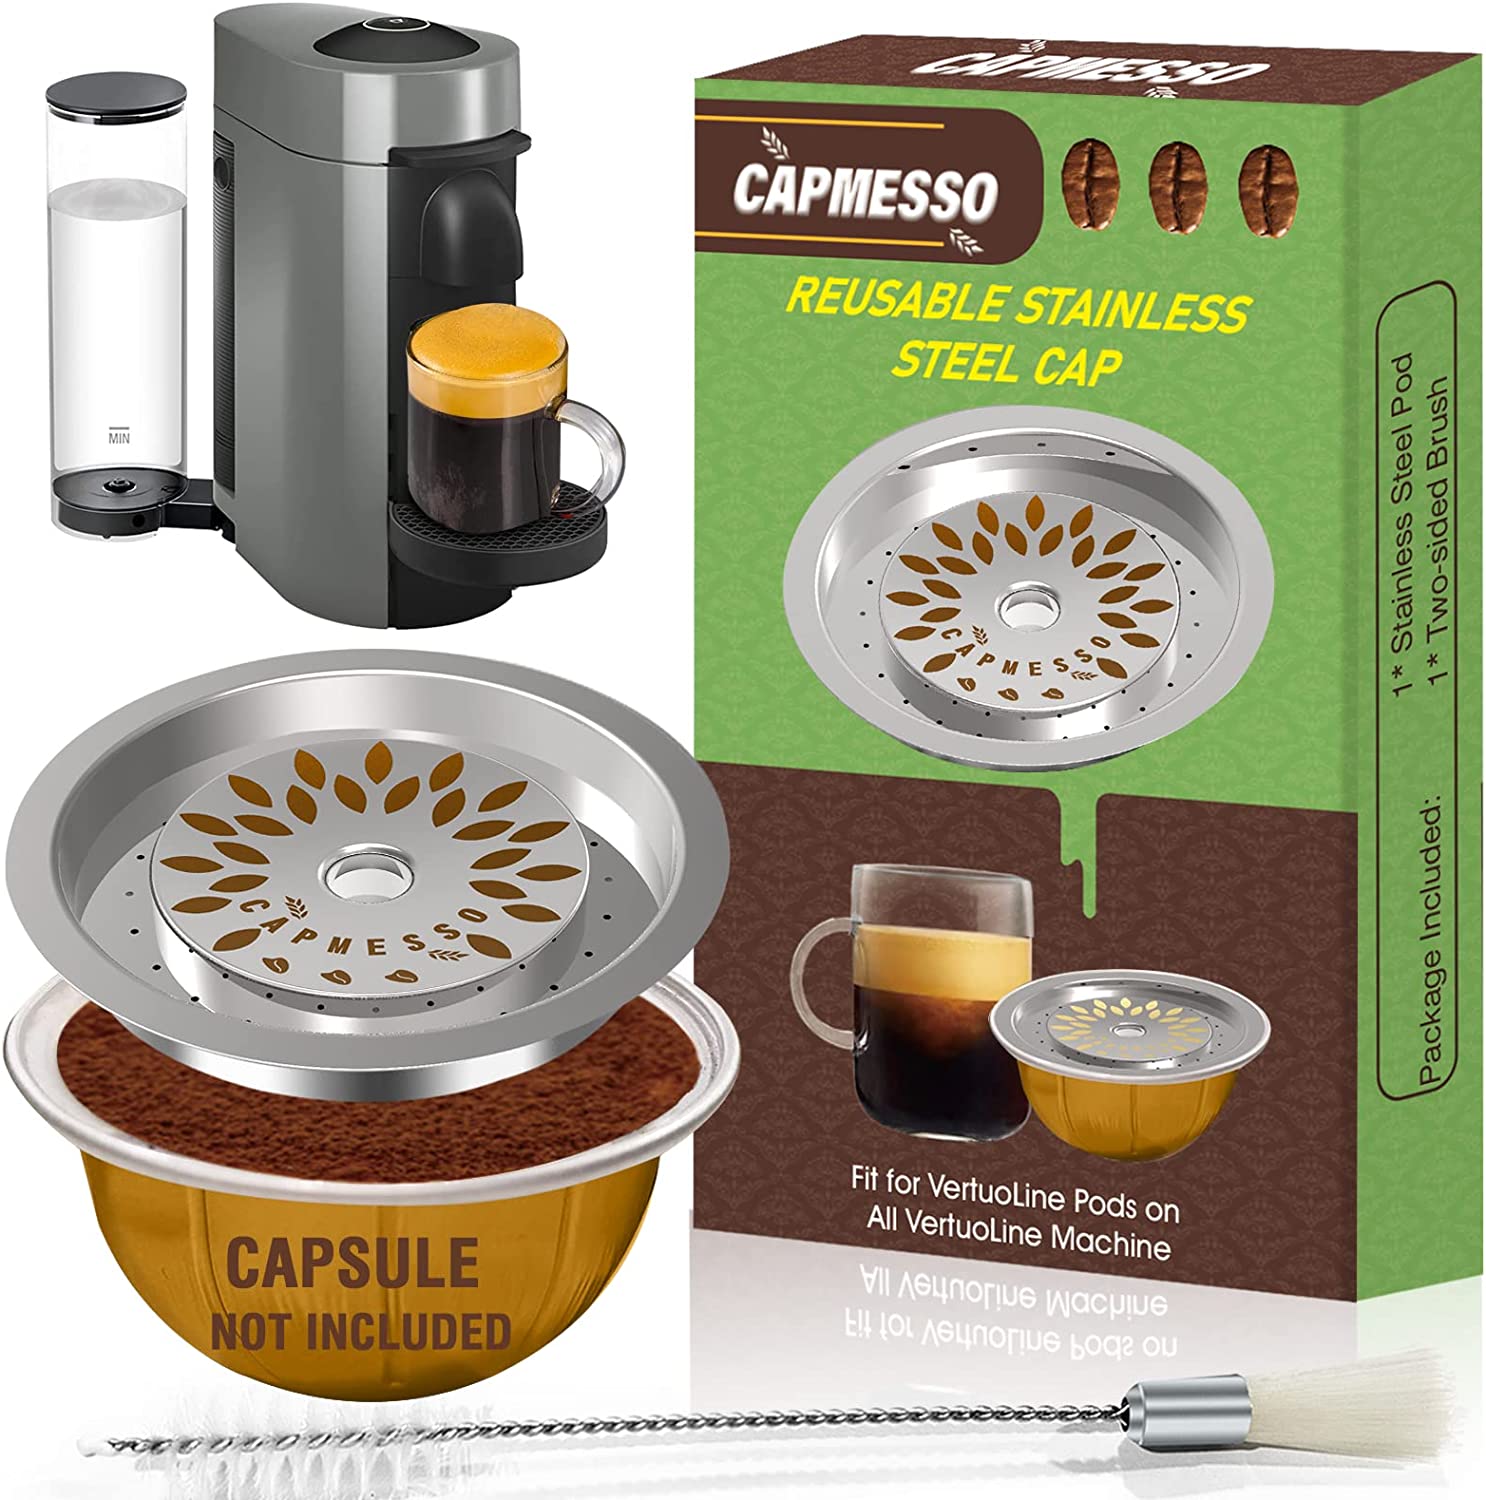 Grasseed Refillable Vertuo Capsule, Reusable Stainless Steel Vertuo Pod Kit  with 40 Foil Lids, Spoon, Brush, Brew 7.8oz- Compatible with Vertuoline